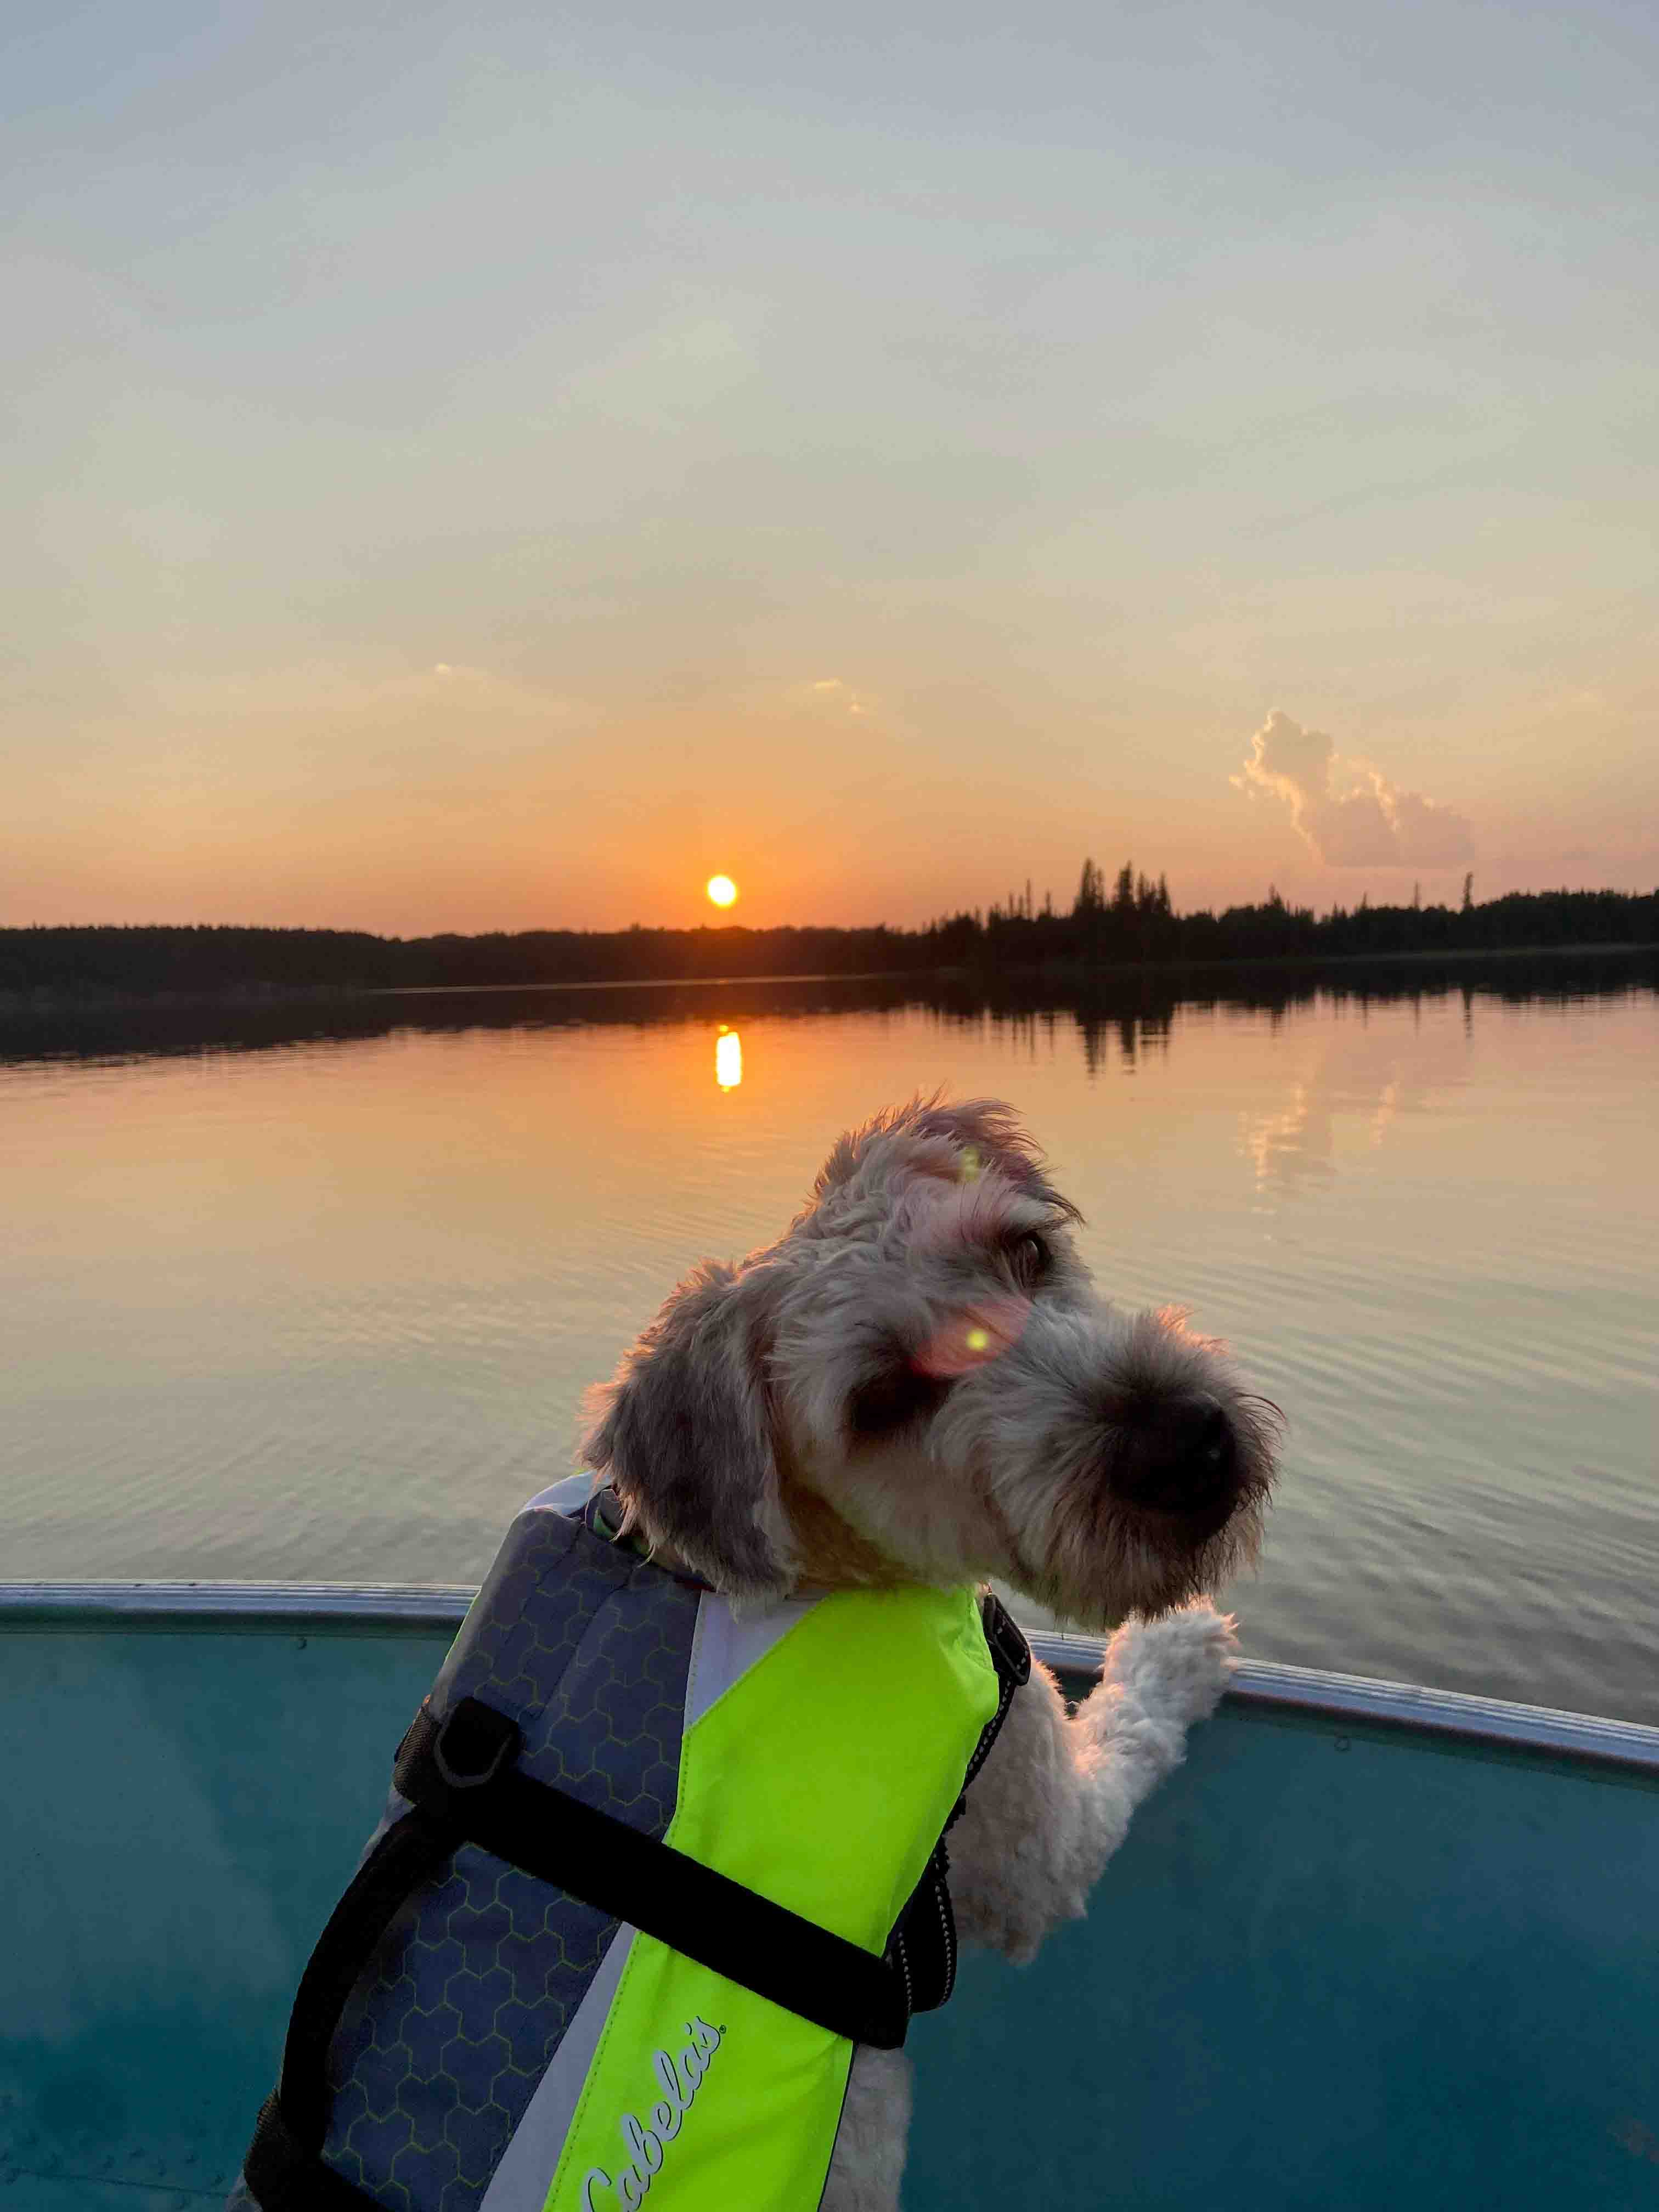 Xita, a dog, in a boat at sunset on a lake on Ontario Canada.